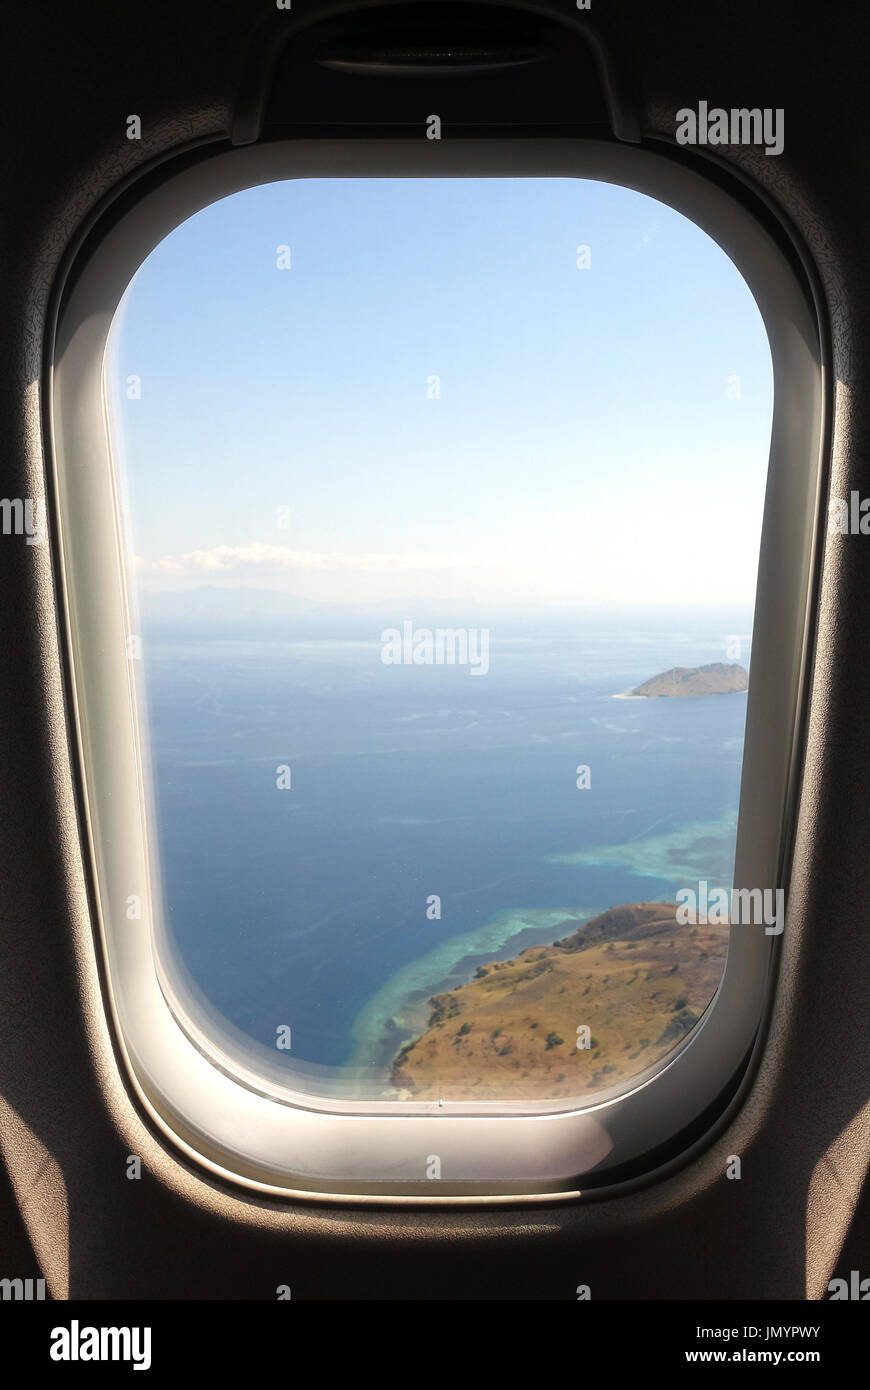 Looking out airplaine window seat at exotic tropical coast of islands and blue turquoise colored ocean water while arriving at Flores, Indonesia Stock Photo